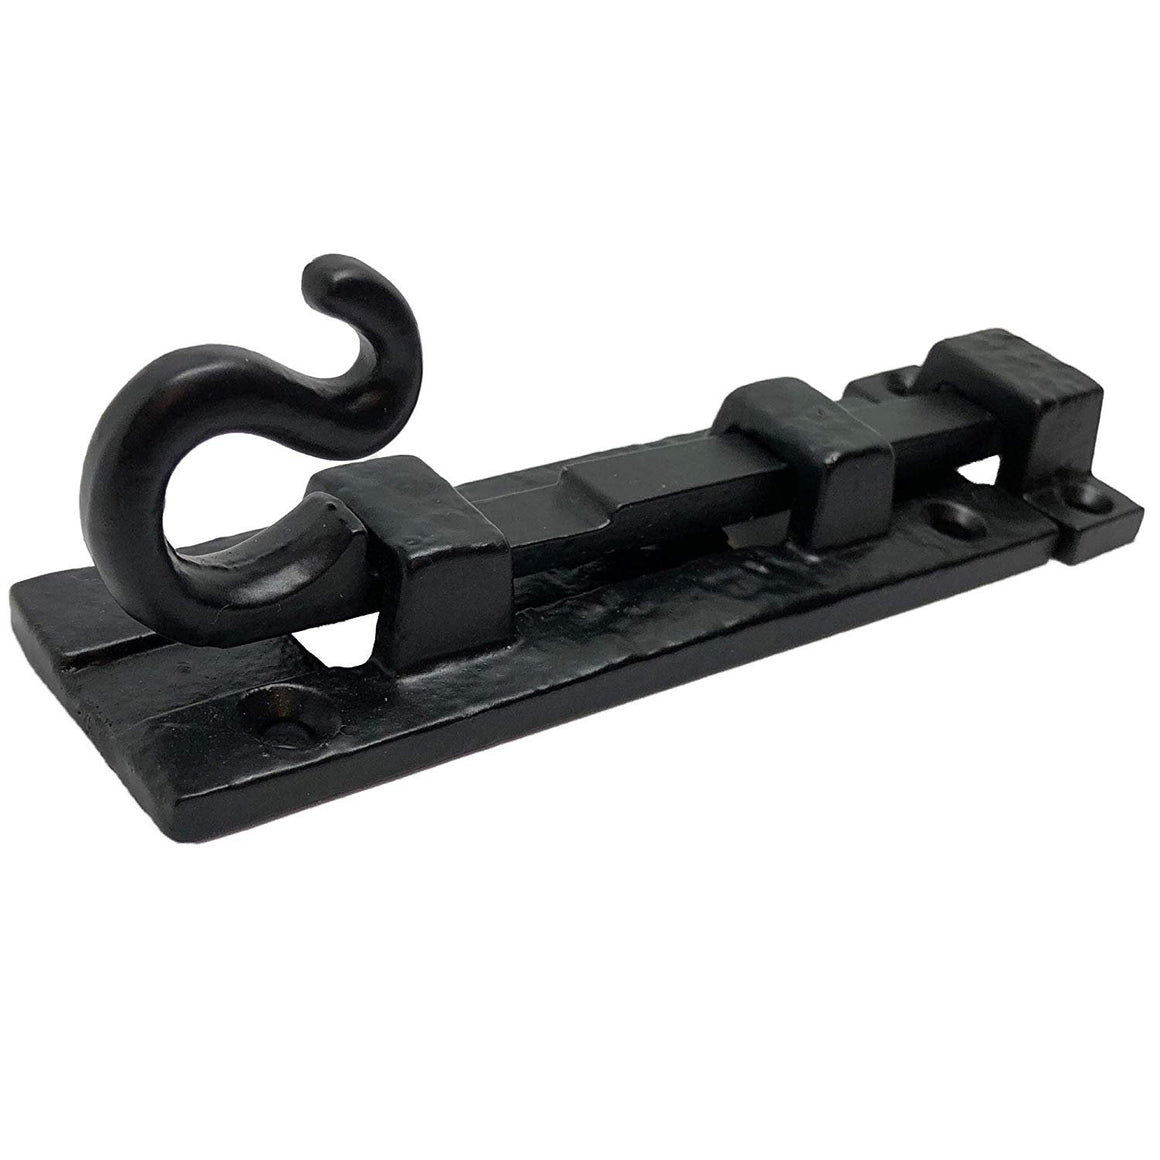 (1) - 5" Black - Monkey Tail Door Bolt Latches - DB-110 Antique Style Door Bolt Latch for Gates, Doors, Closet, Cabinet, Sliding Barn & Shed Doors - in Vintage Black cast Iron - DB-110